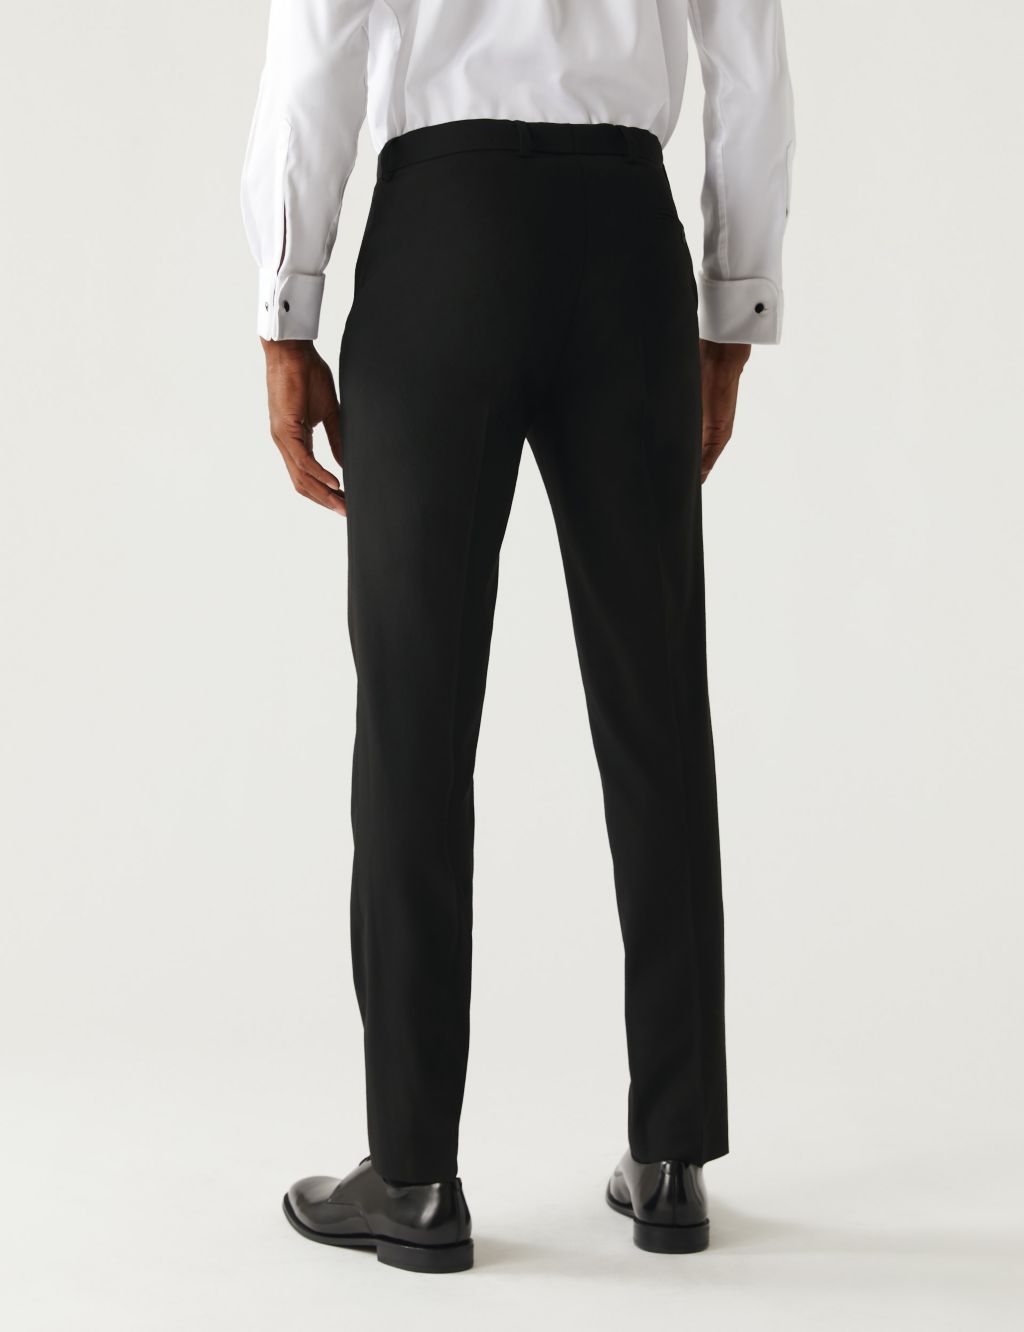 Black Skinny Fit Suit Trousers image 4